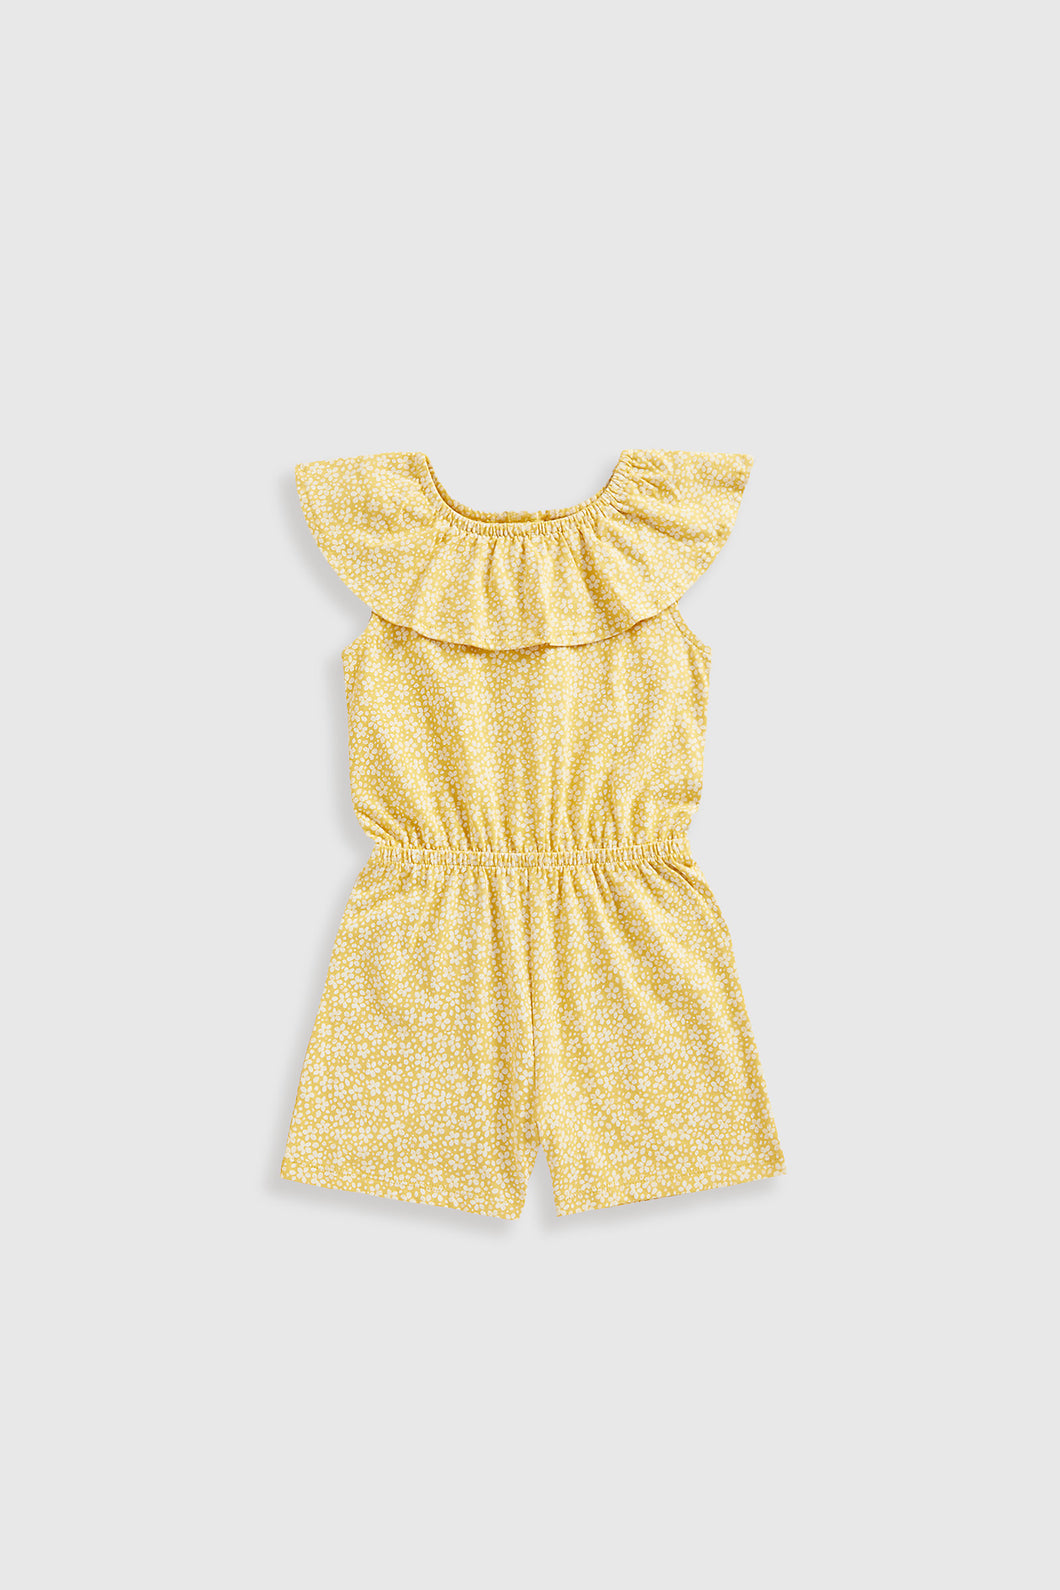 Mothercare Yellow Floral Jersey Playsuit